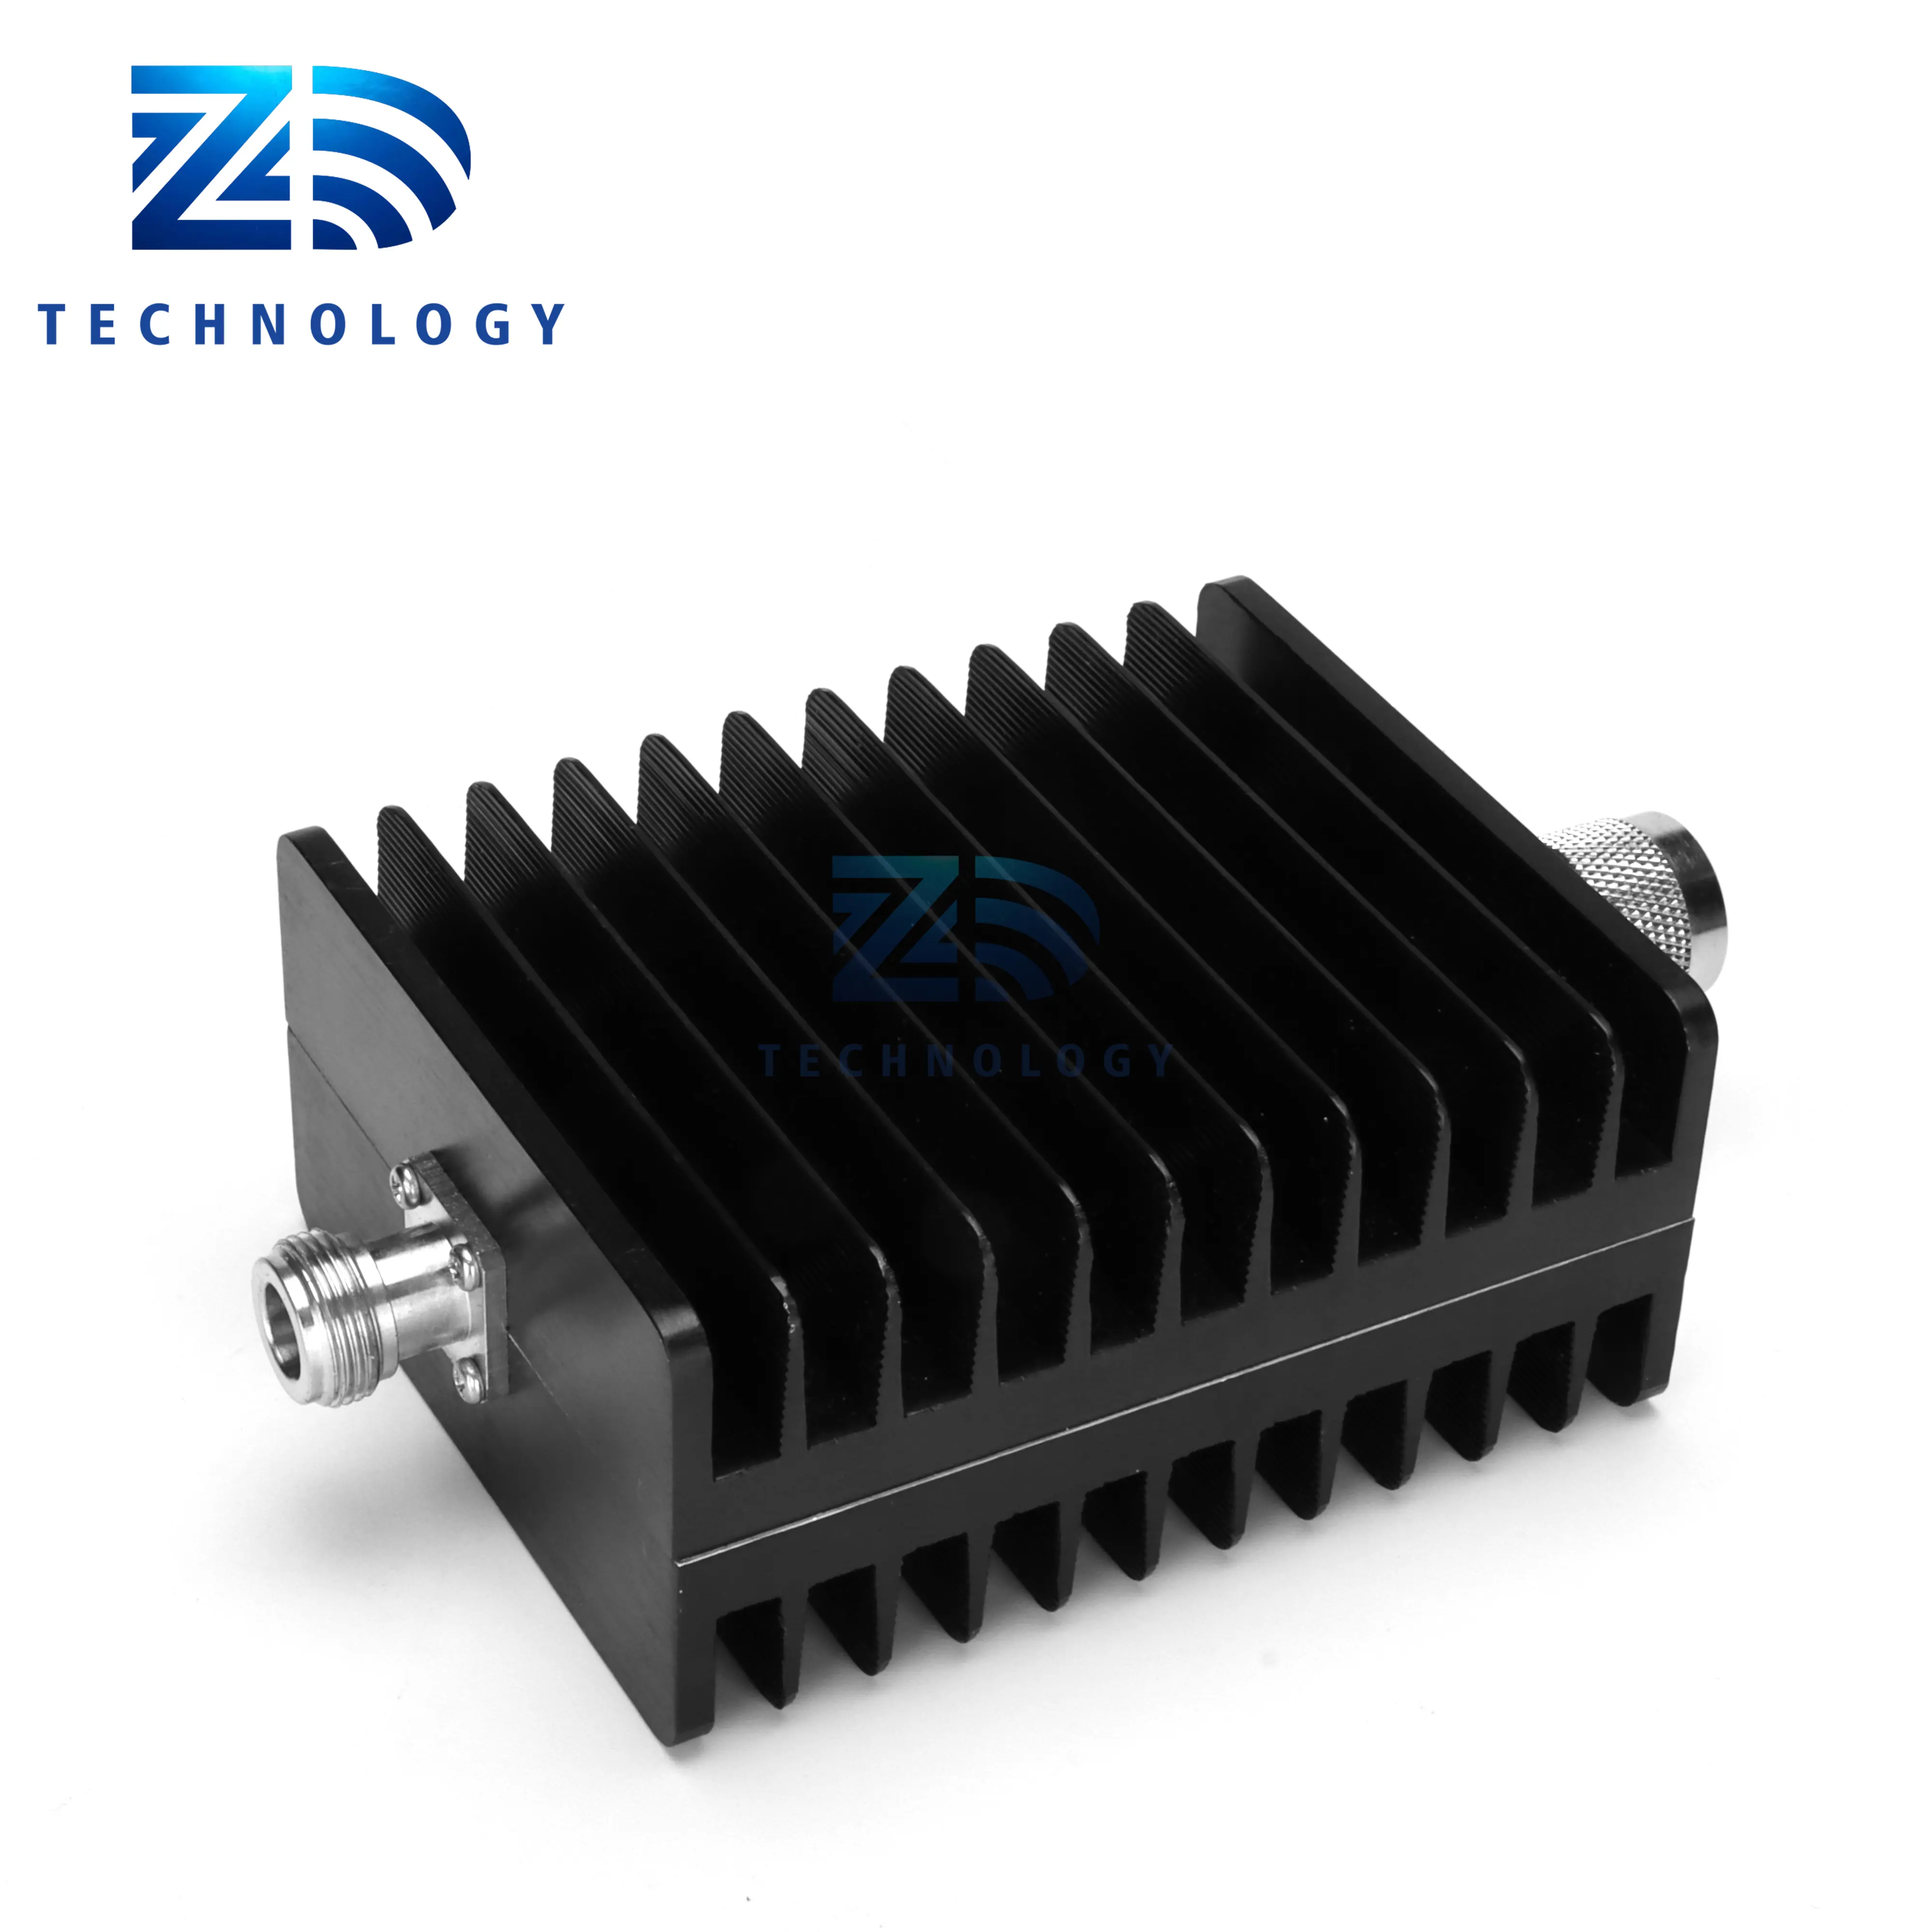 DC To 4000 MHz Coaxial N-Type Fixed Attenuator 100W 40dB Excellent VSWRN-Male And N-Female Connectors Bi-directional